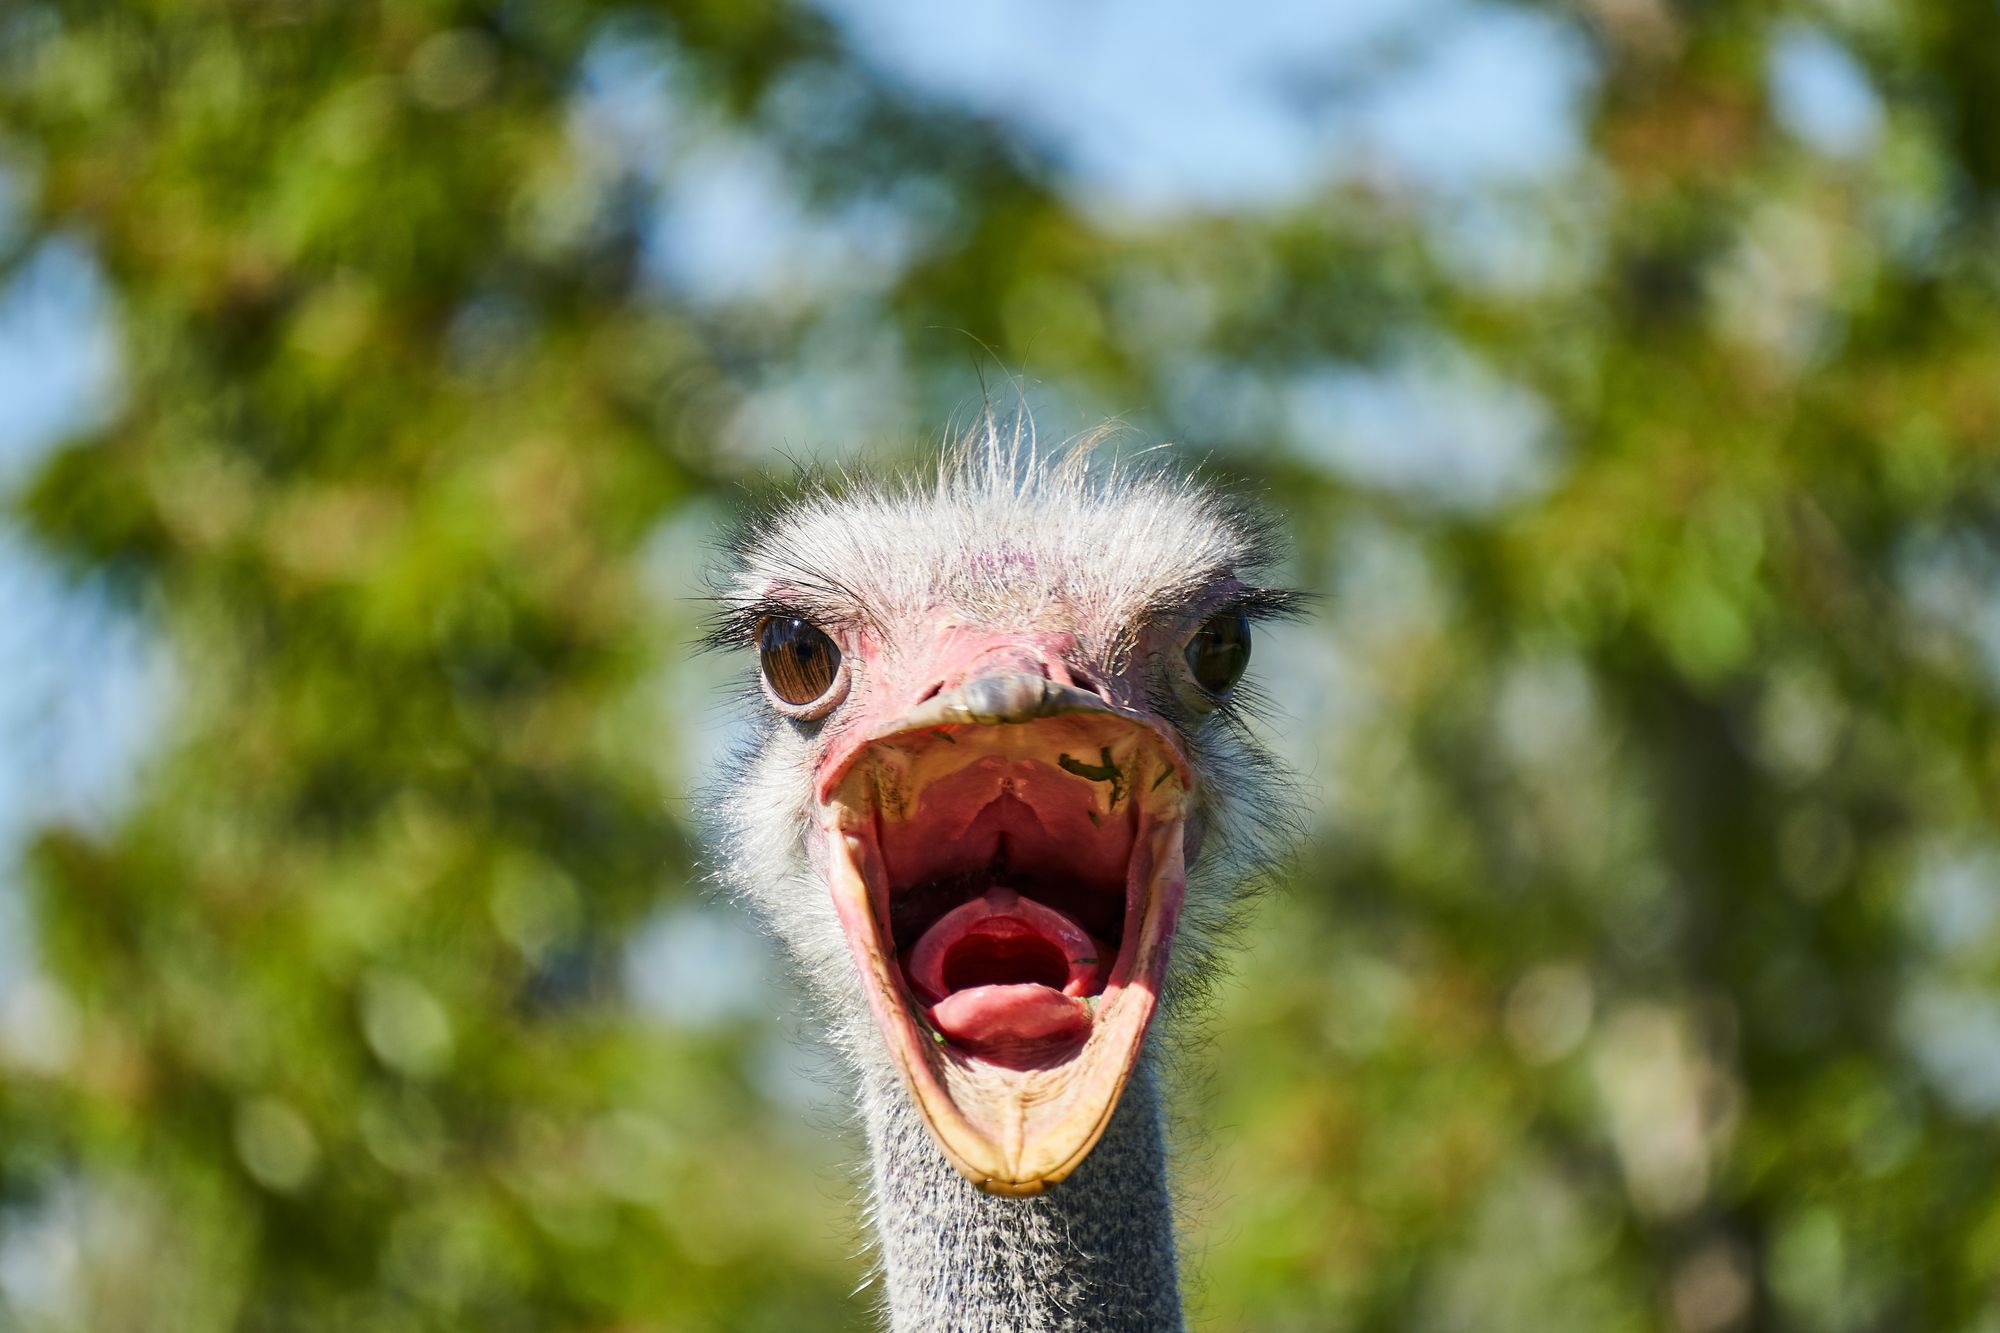 An open-mouthed ostrich staring at the camera